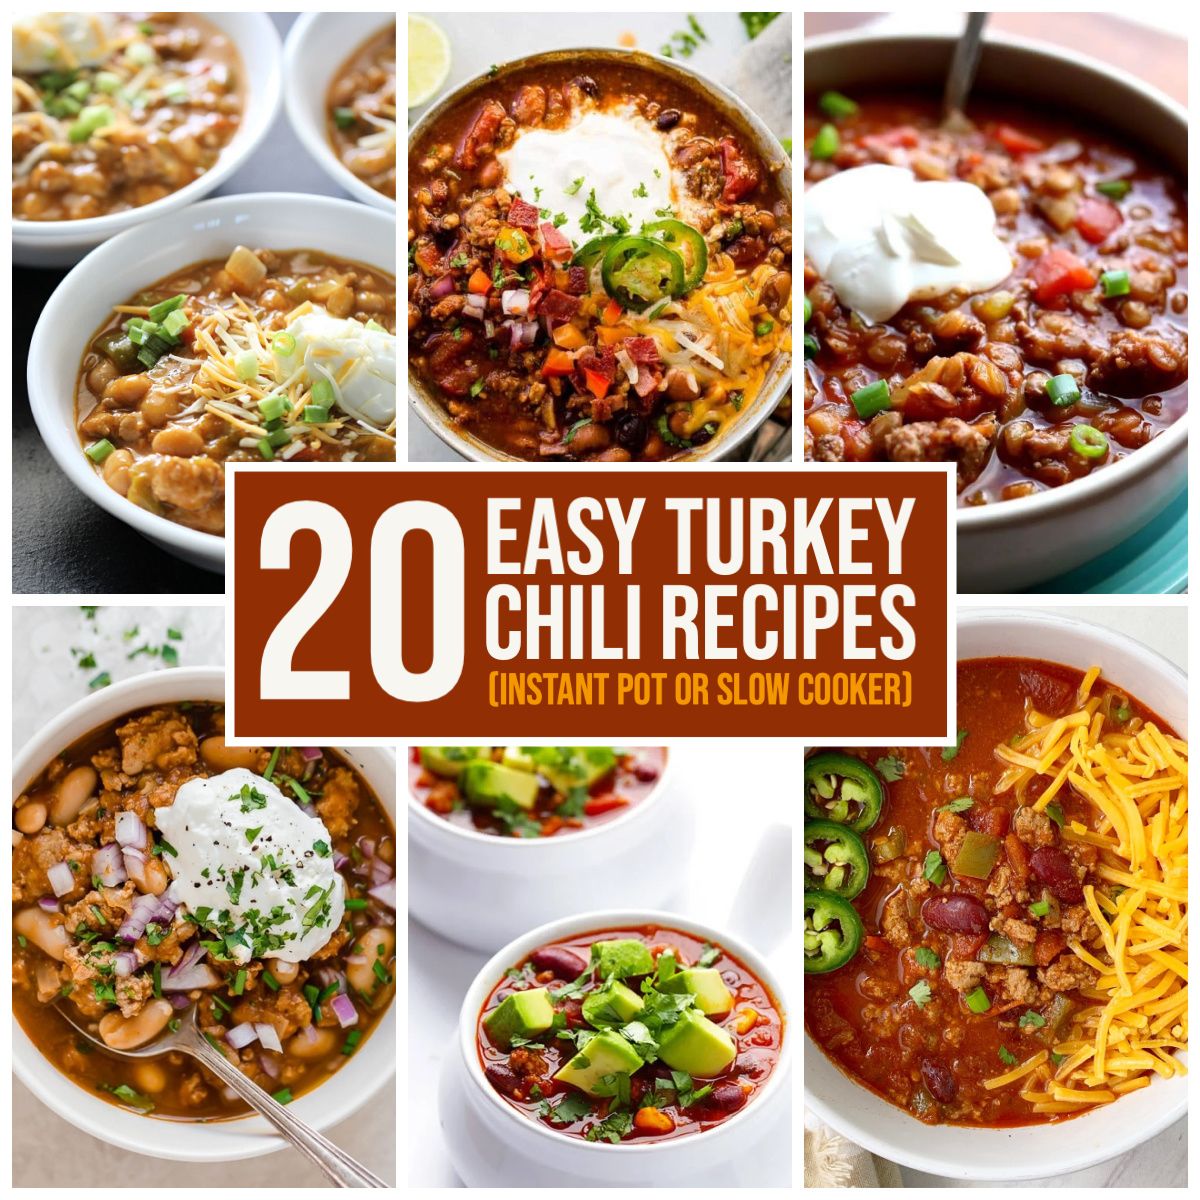 20 Easy Turkey Chili Recipes (Instant Pot or Slow Cooker) collage of featured recipes with text overlay